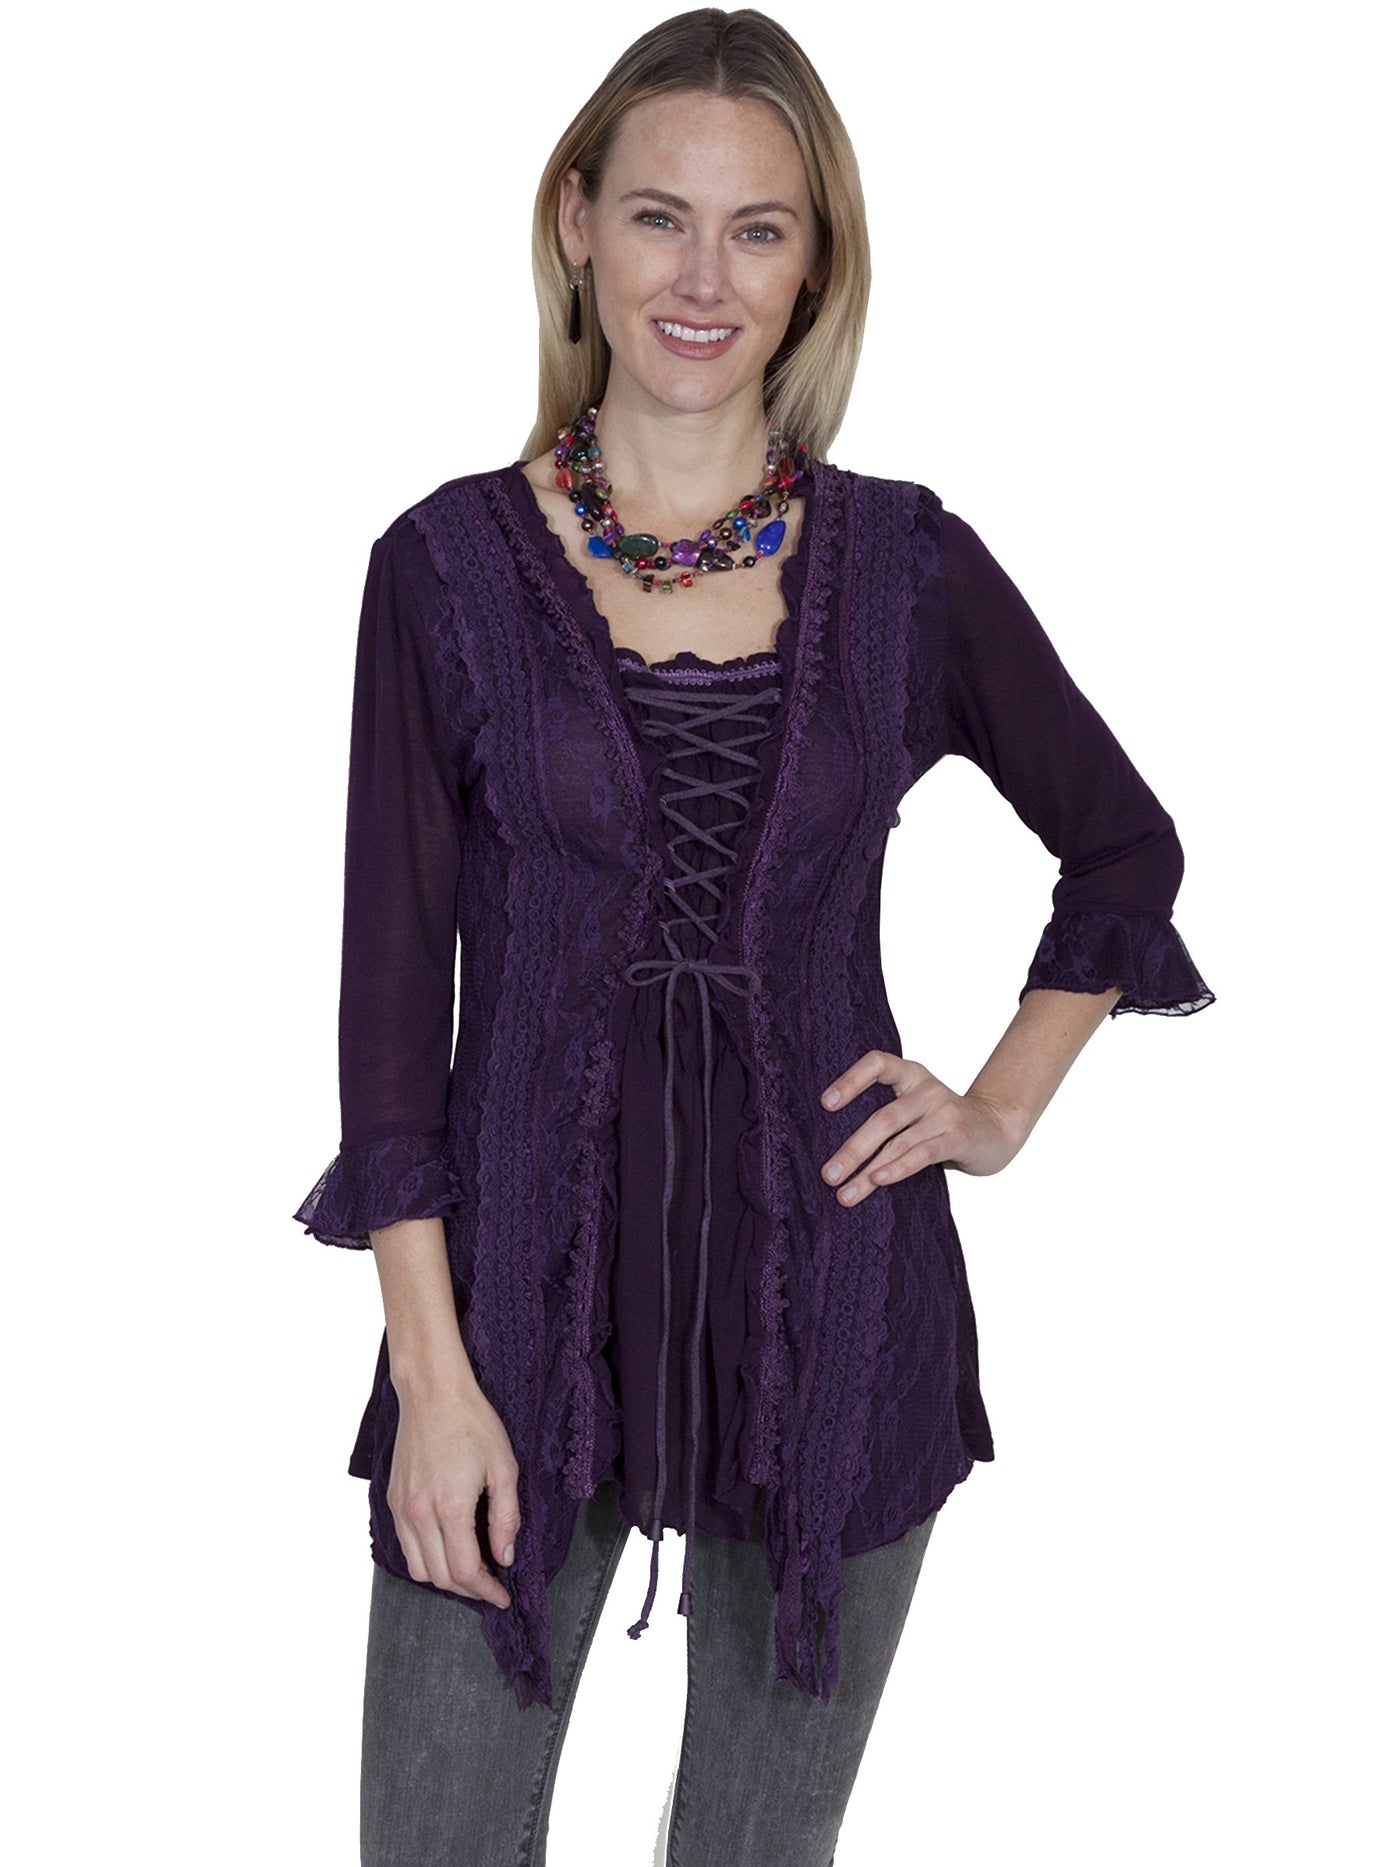 Horse Riding Lace Top in Purple SOLD OUT